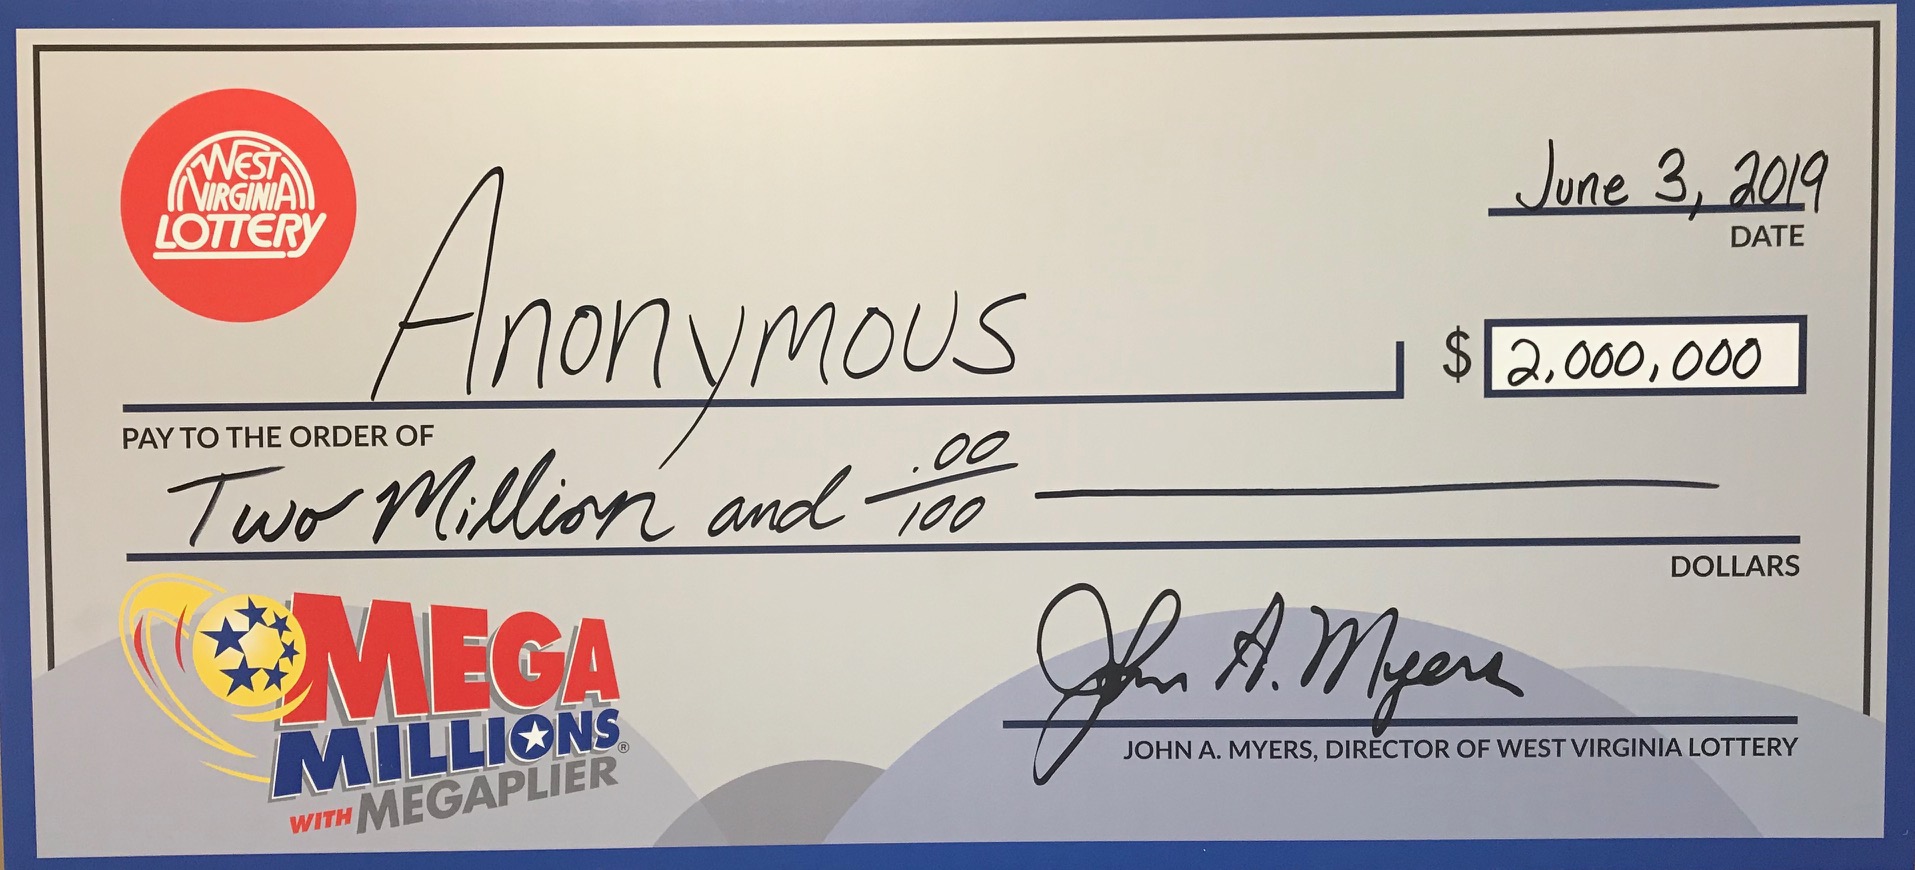 Lottery Purchaser Of 2 Million Mega Millions Ticket Chooses To Remain Anonymous Wv Metronews